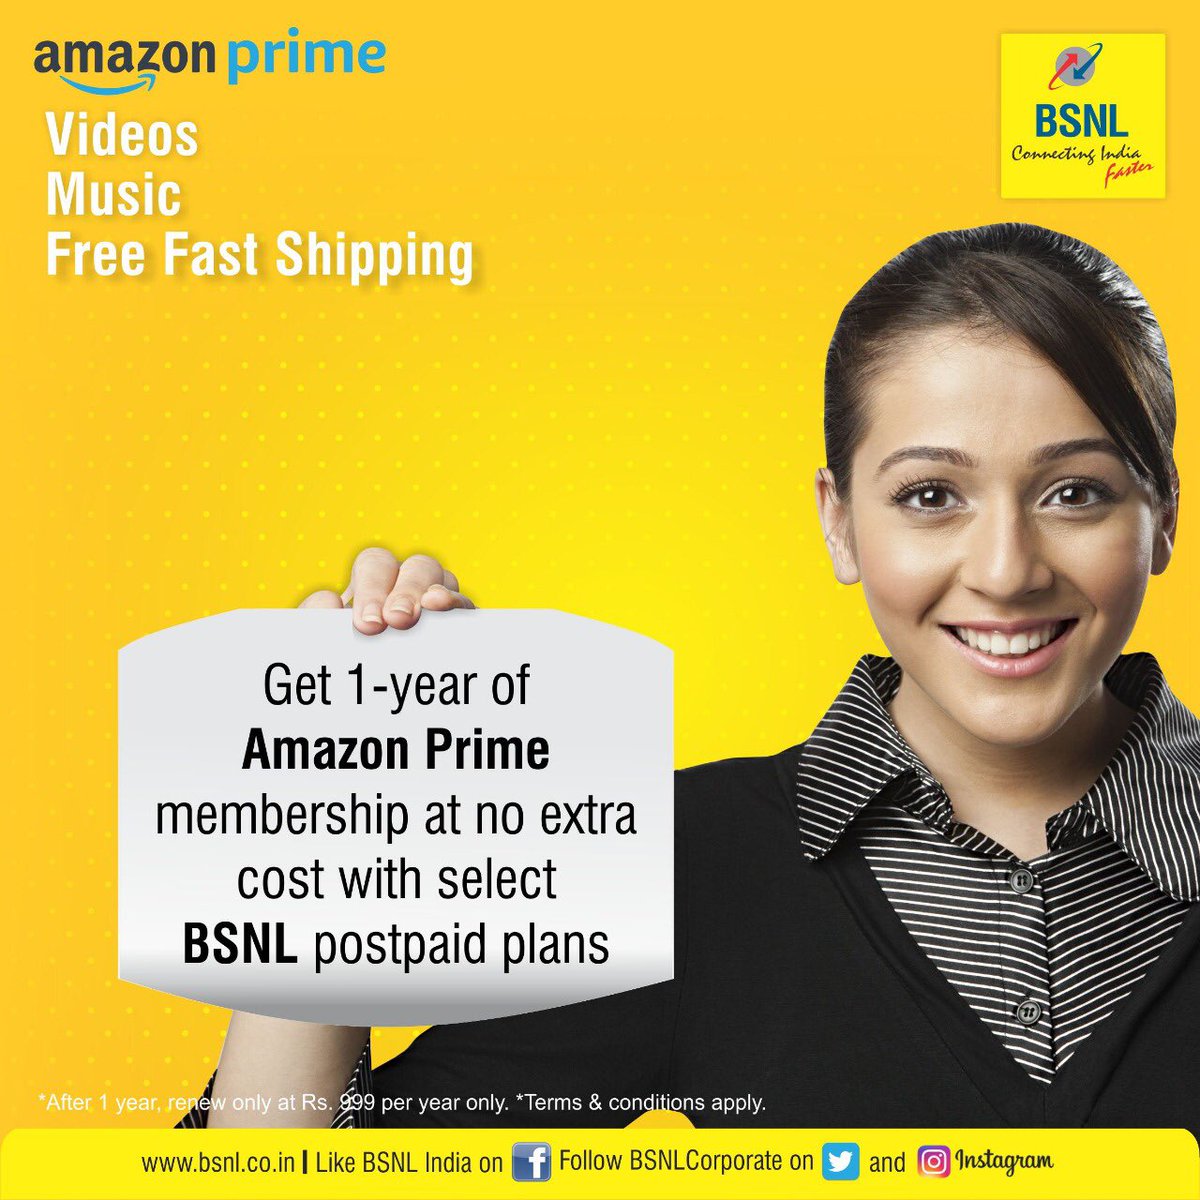 Bsnl India Enjoy Unlimited Video Streaming Ad Free Music And Free Fast Delivery With A 1 Year Amazon Prime Membership Now Included With Select Bsnl Postpaid Broadband Landline Plans To Know